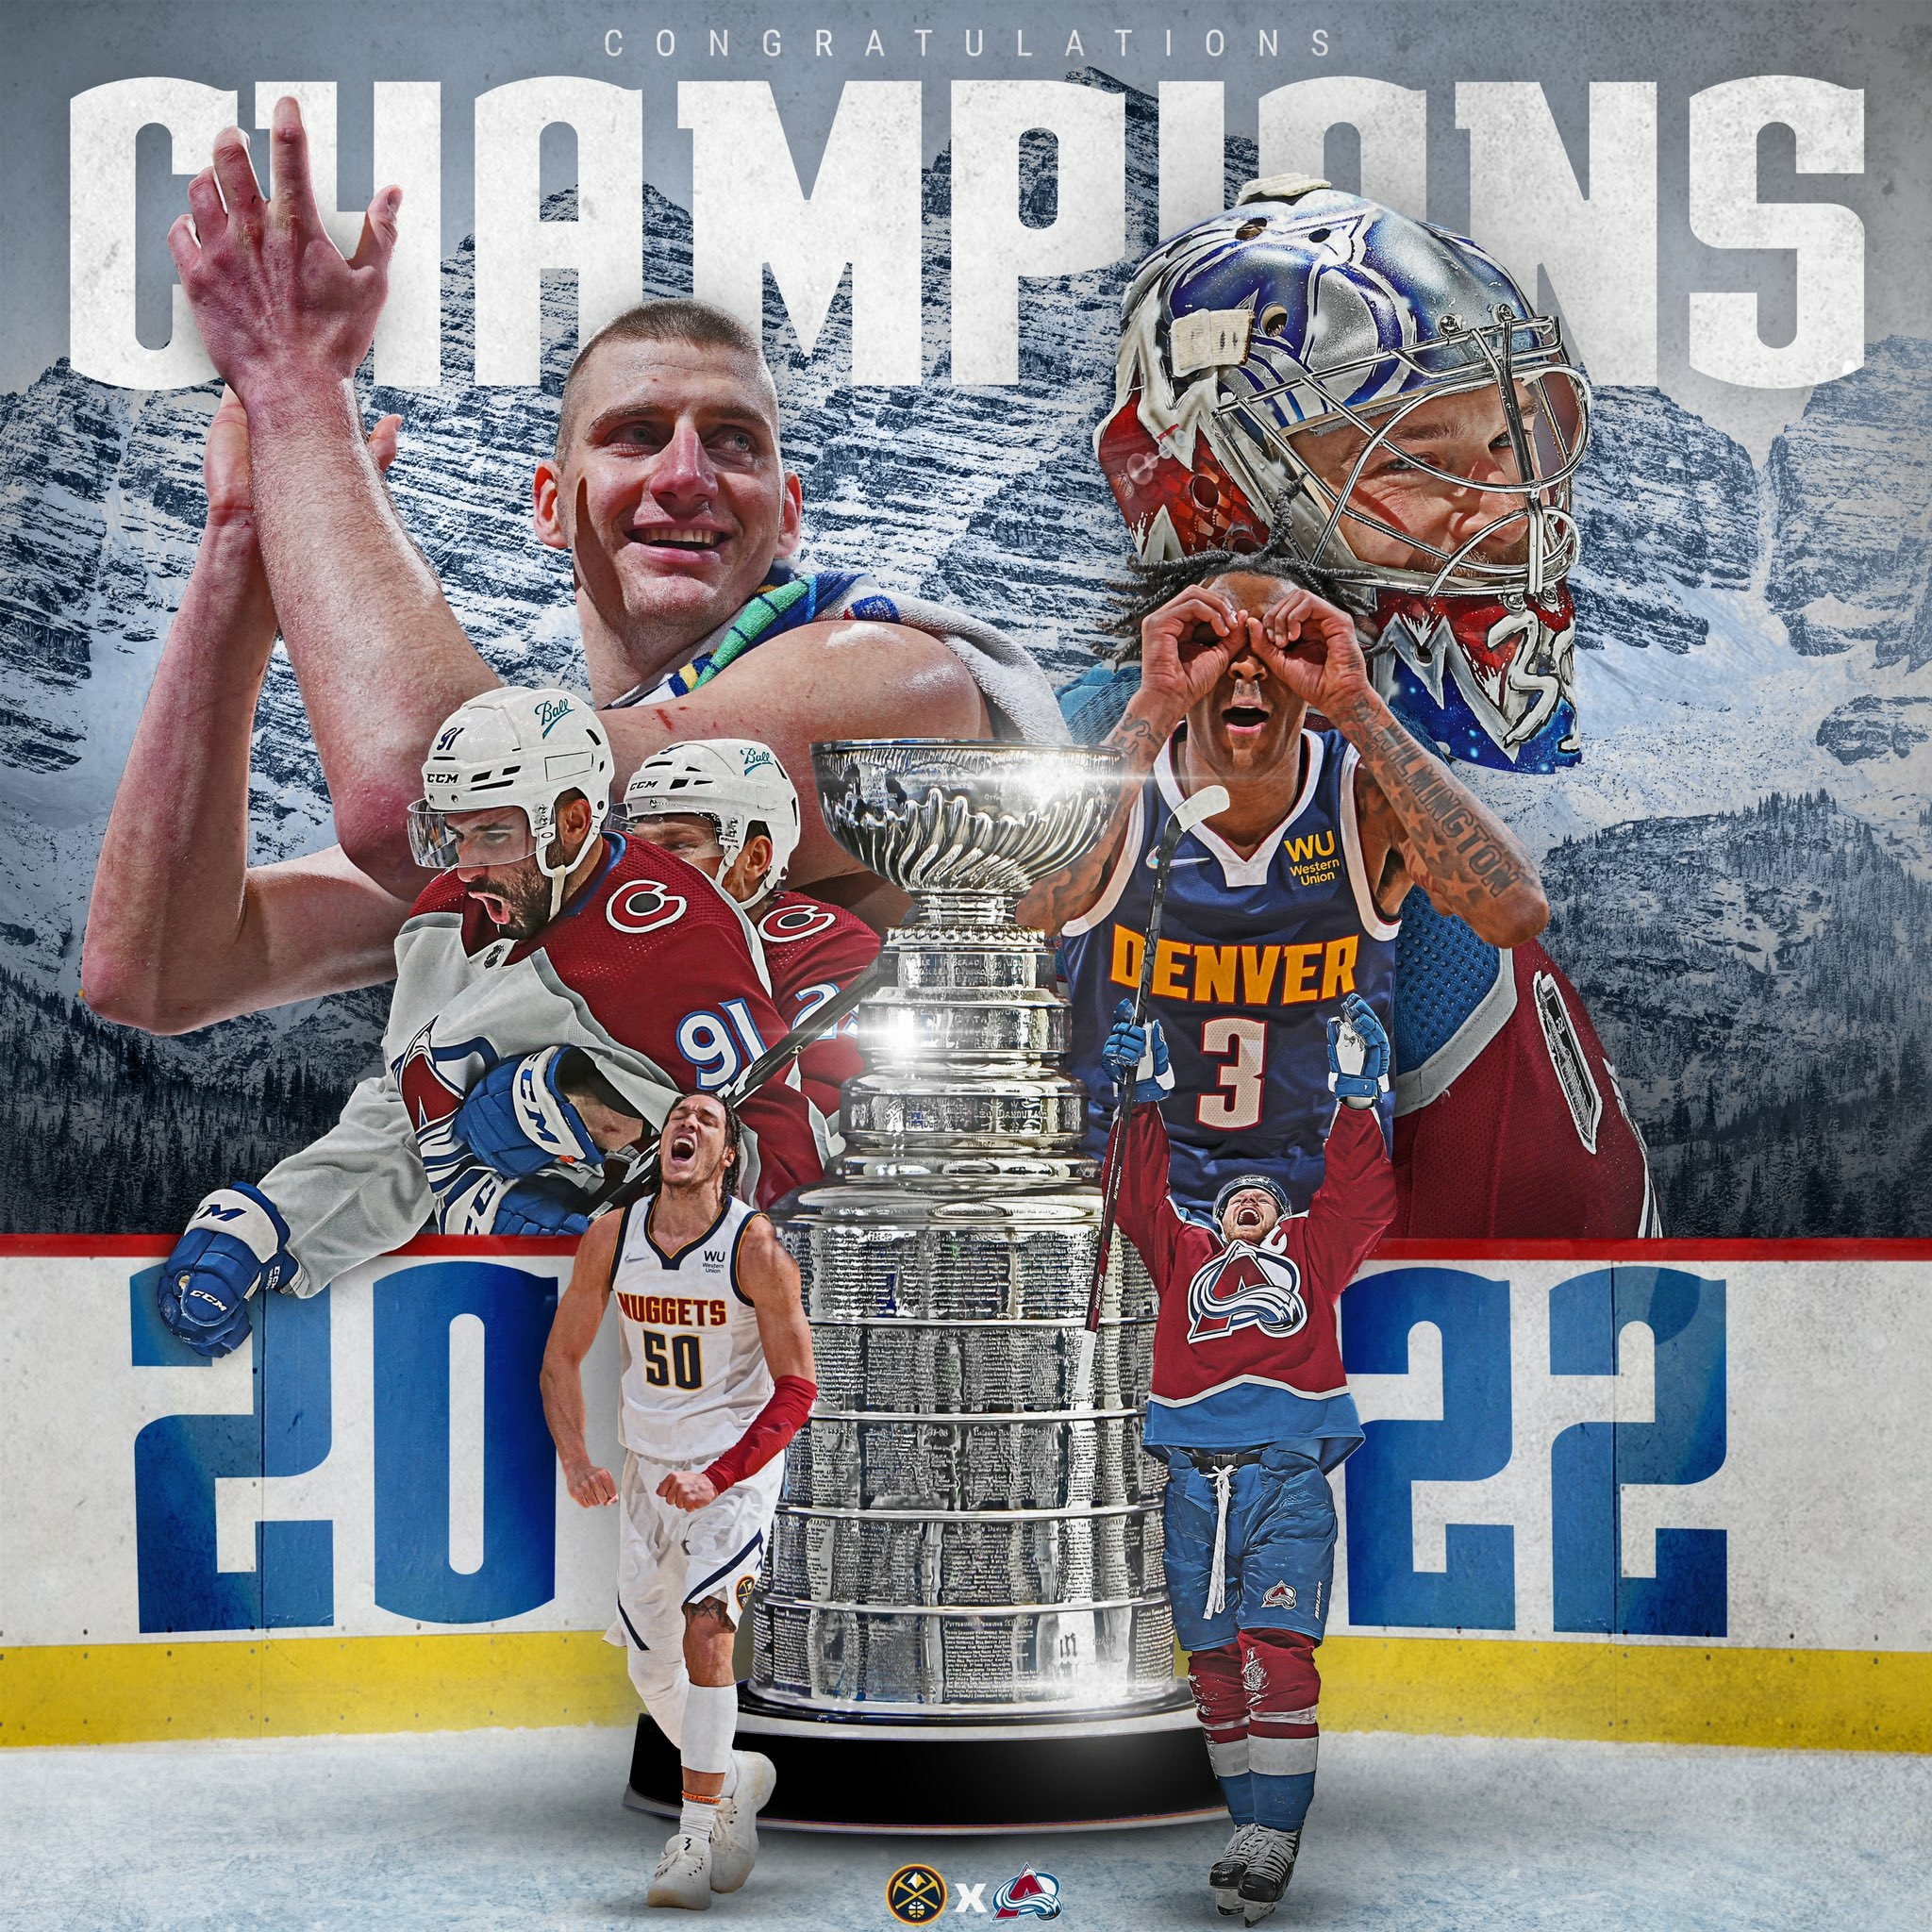 1080x2240 Resolution Colorado Avalanche Stanley Cup 2022 Champion 1080x2240  Resolution Wallpaper - Wallpapers Den